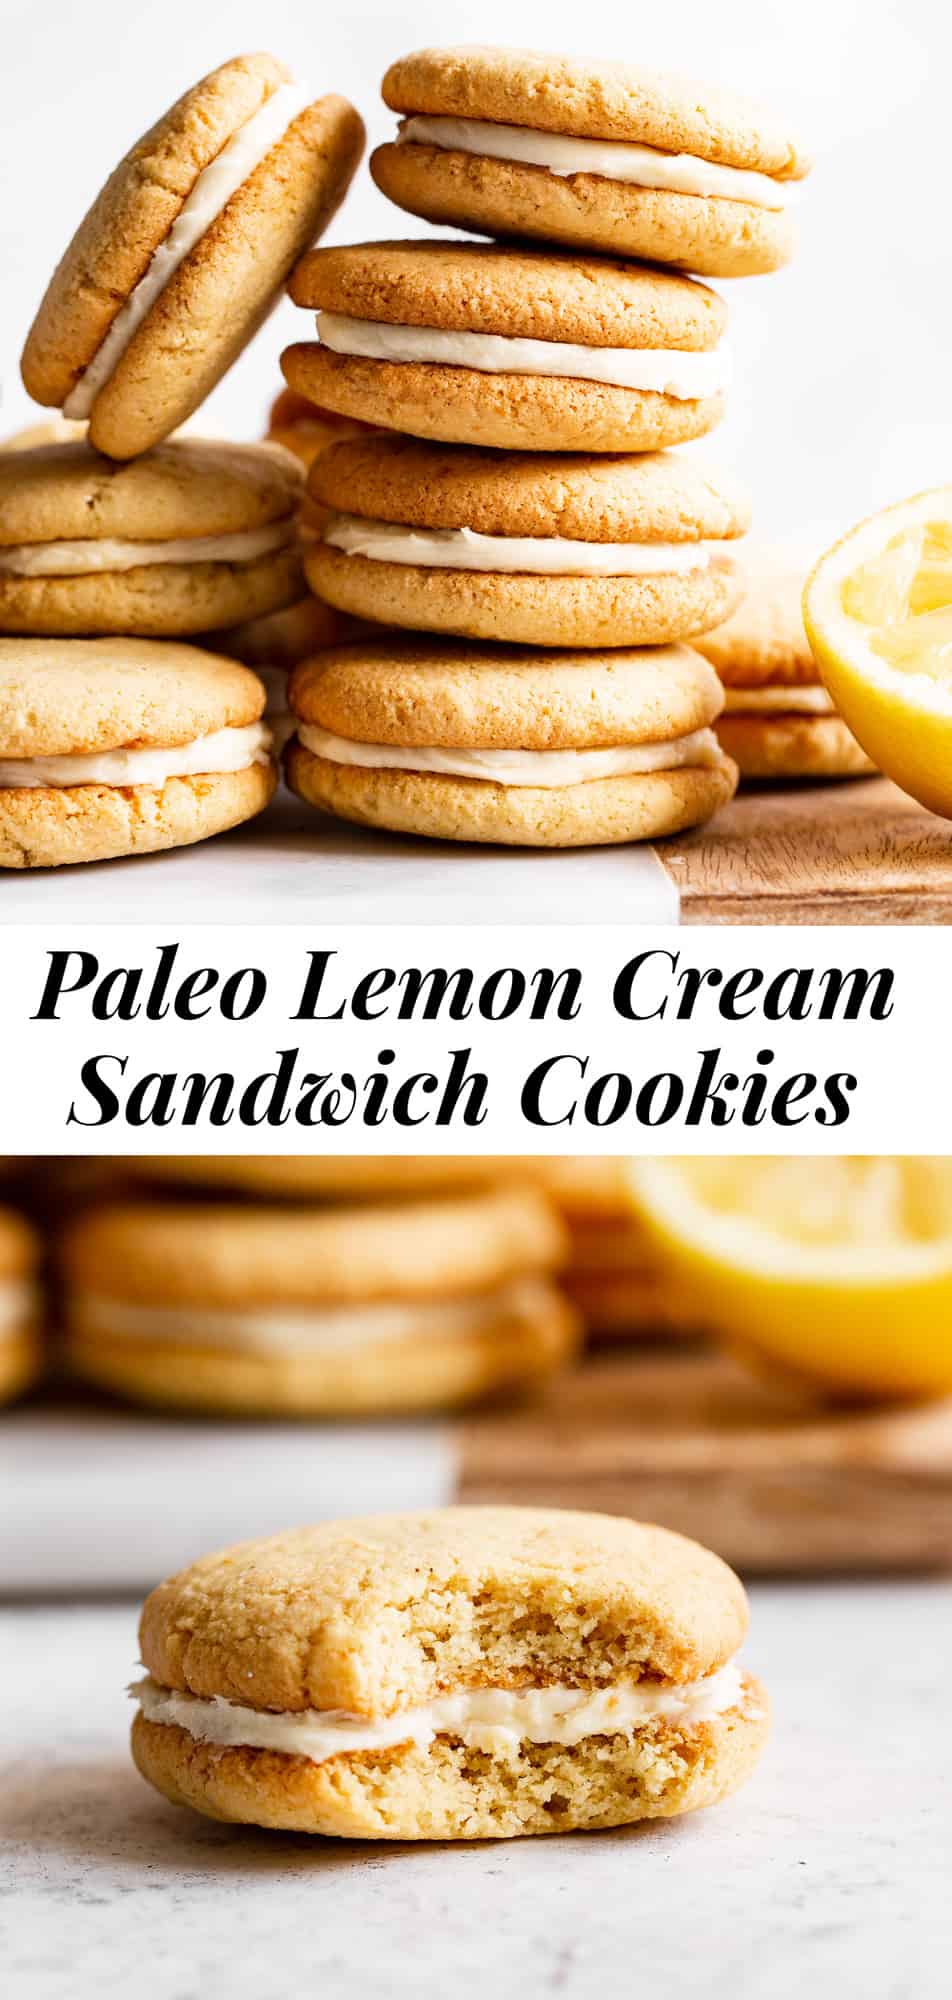 These Lemon Cream Sandwich Cookies are a dream! They’re grain free, dairy free and paleo but no one would ever guess. Sweet lemony slightly chewy sugar cookies are filled with a lemon cream filling to make delicious and surprisingly easy sandwich cookies! Family approved and perfect for any gathering or whenever you need a treat. #paleo #glutenfree #cleaneating 